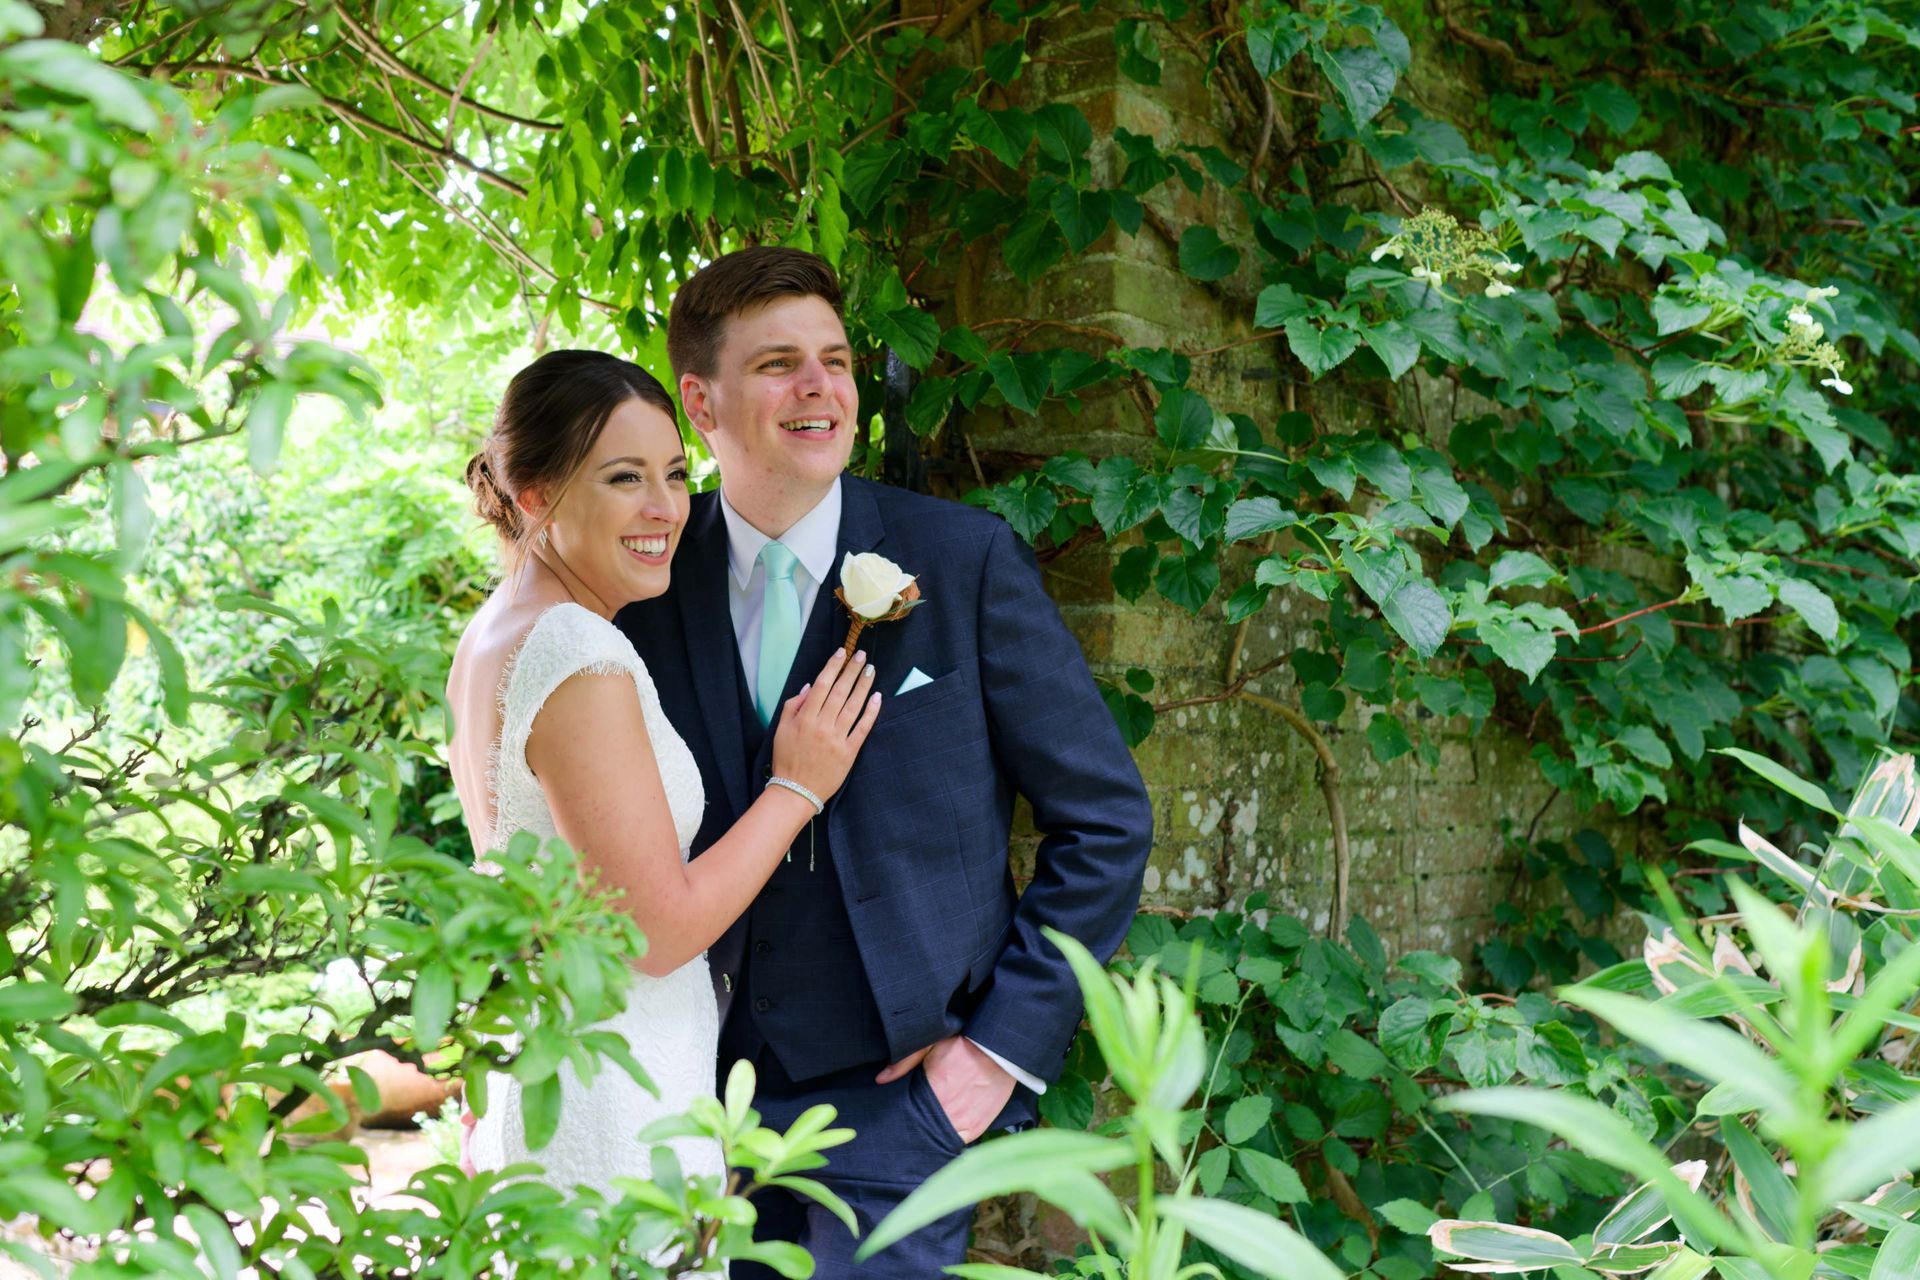 A bride and groom are posing for a picture in a garden.